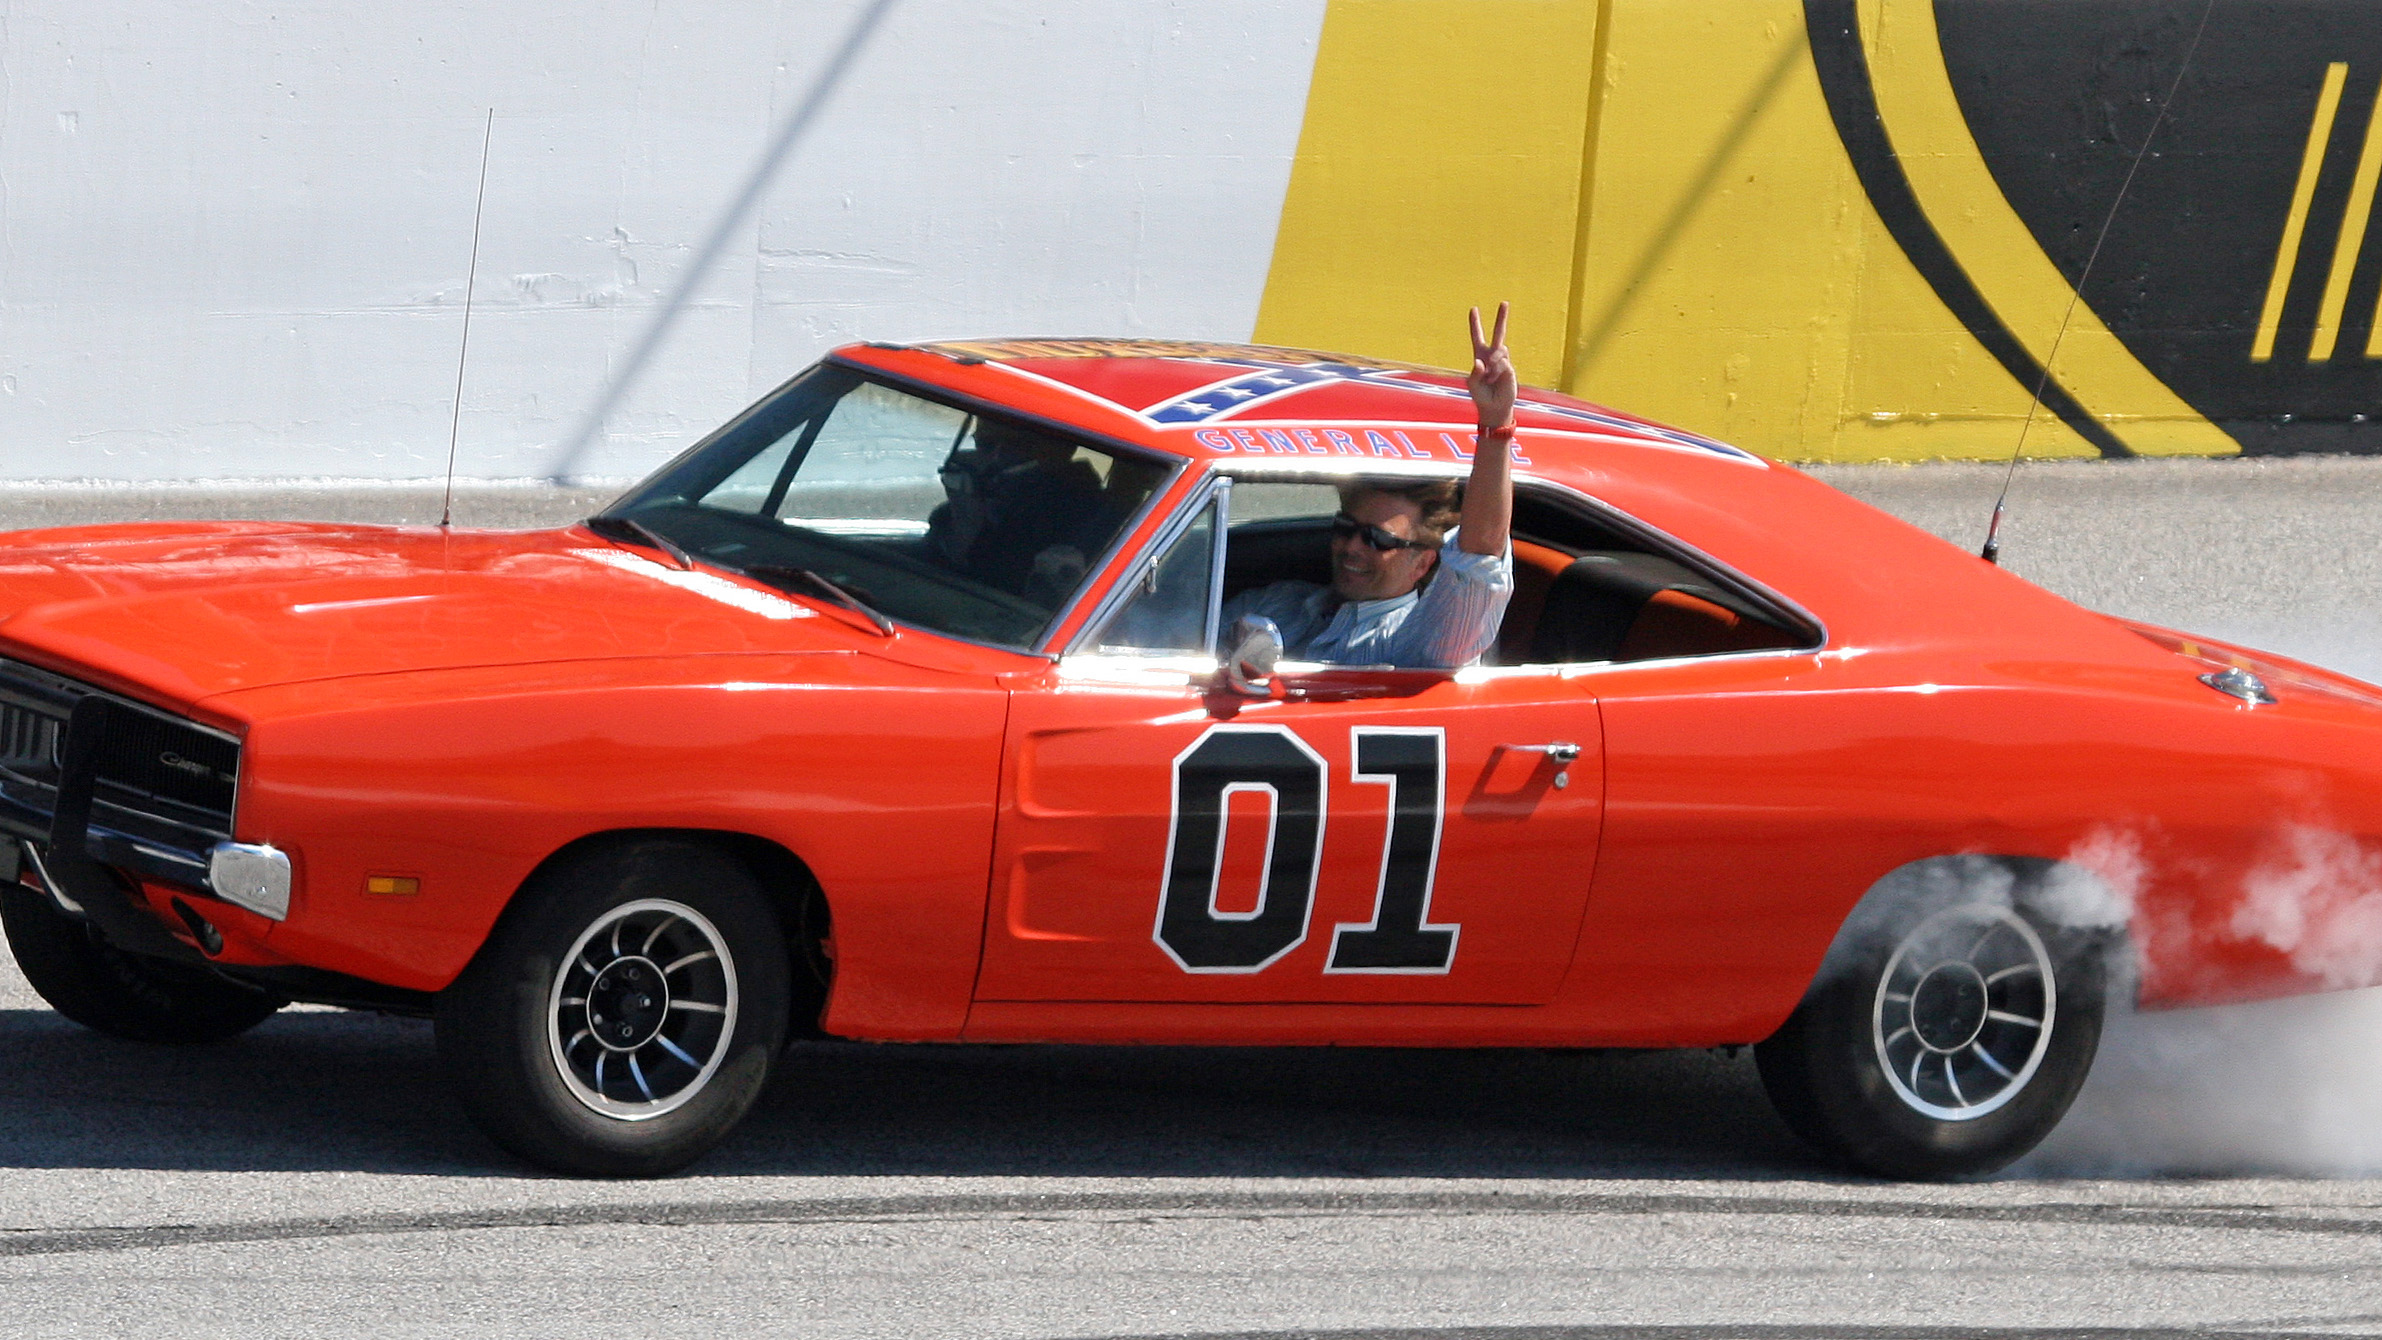 Dukes of Hazzard' General Lee with Confederate flag will stay in auto museum